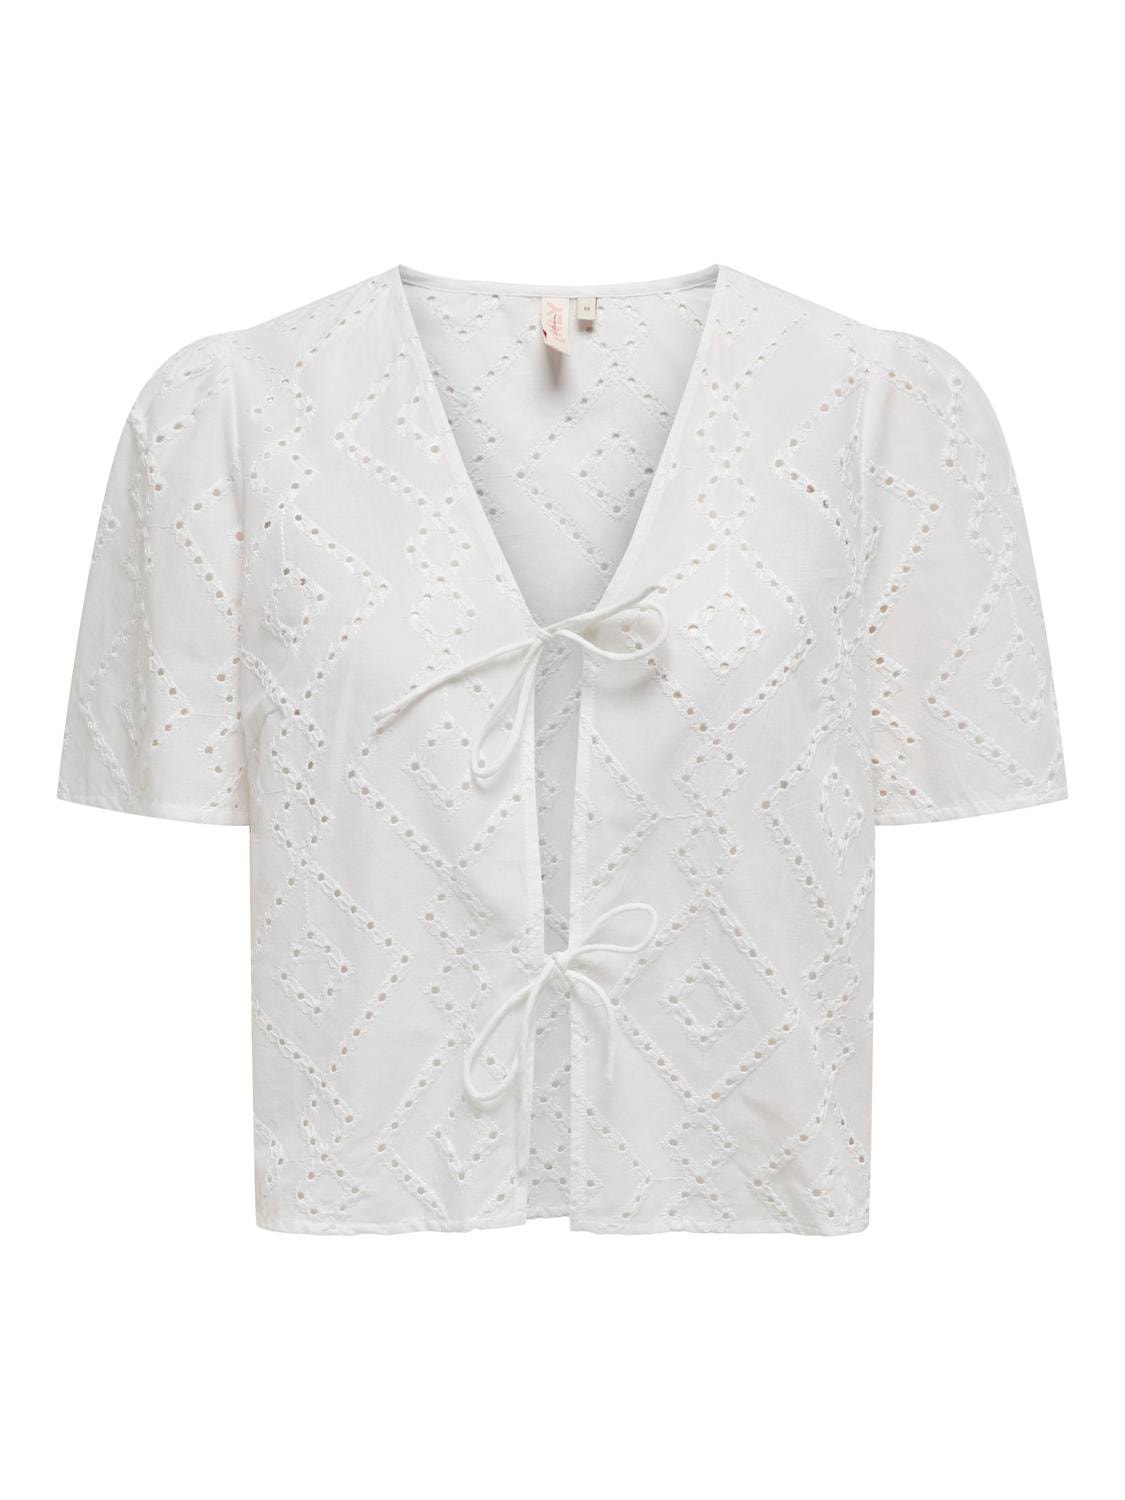 ONLY Top with tie string -Bright White - 15321391